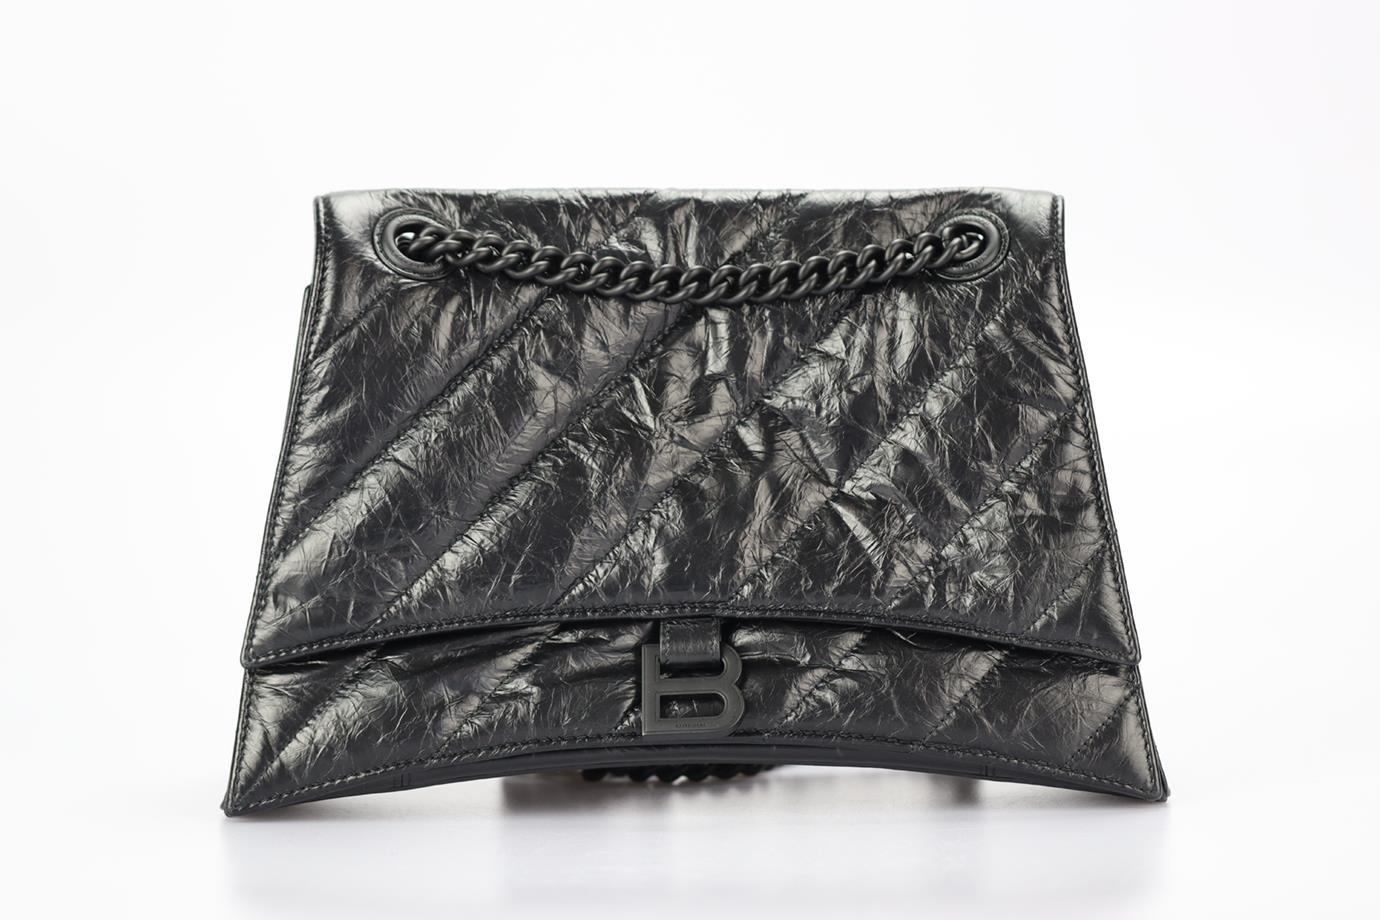 Balenciaga Crush Medium Quilted Leather Shoulder Bag. Black. Magnetic fastening - Front. Comes with - dustbag. Leather. Height: 8.1 in. Width: 11.6 in. Depth: 4 in. Handle drop: 12 in. Strap drop: 22 in. Condition: Used. Very good condition - Loose